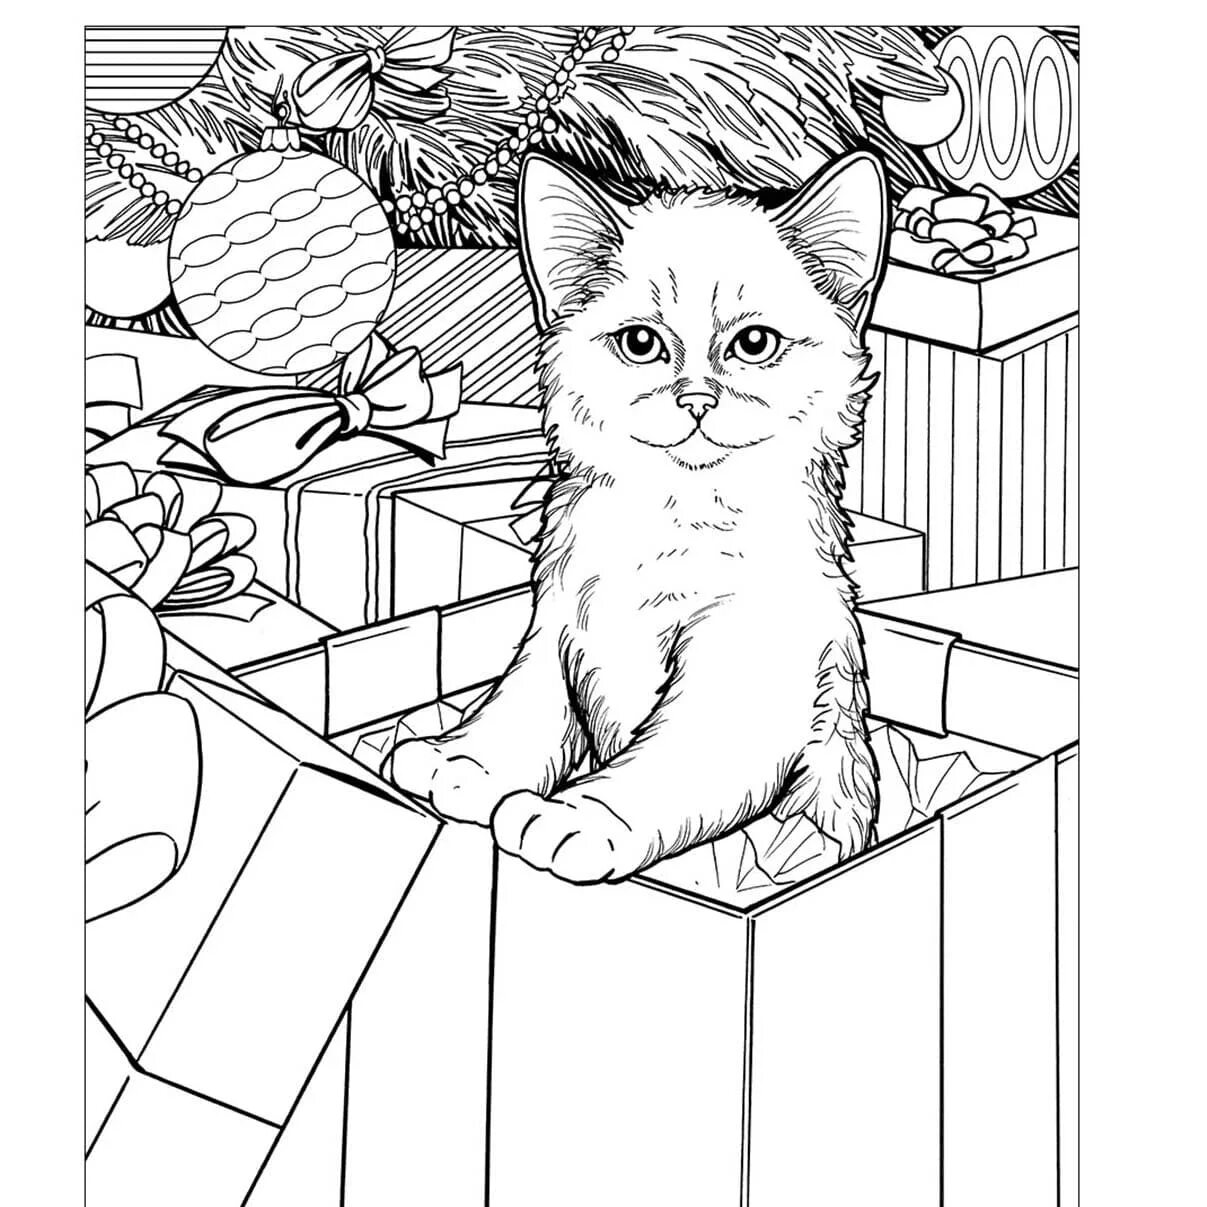 Intriguing new coloring pages